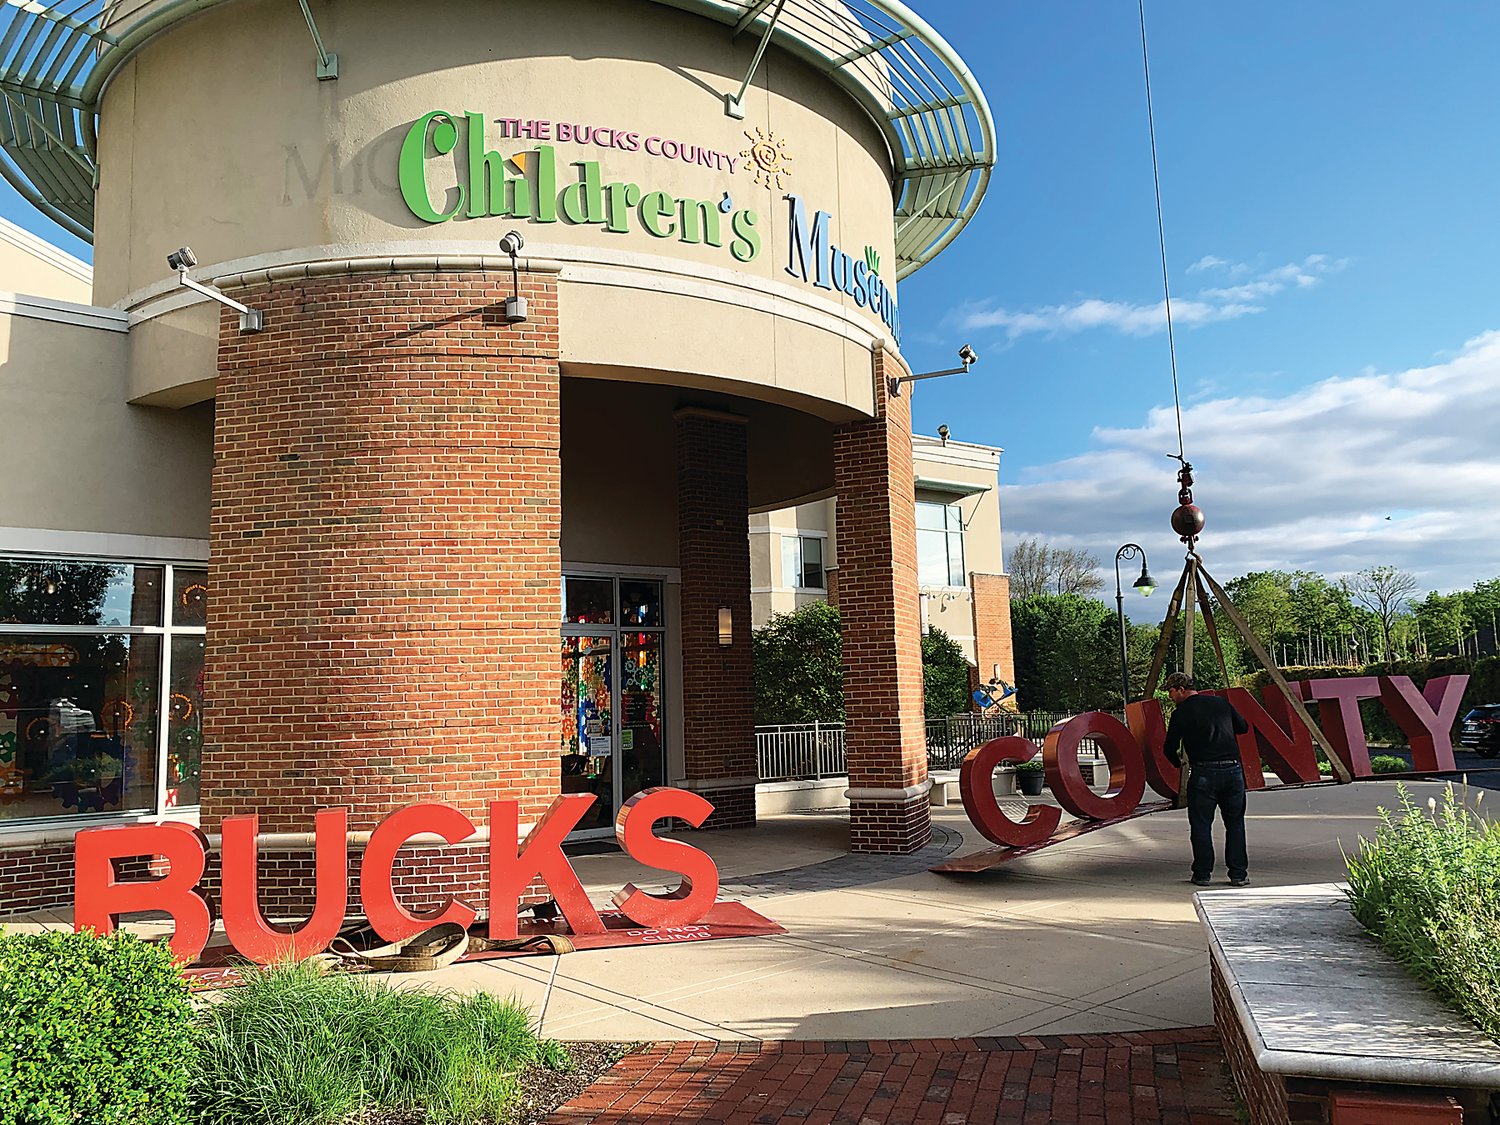 The Visit Bucks County sign is installed outside the Bucks County Children’s Museum in New Hope.